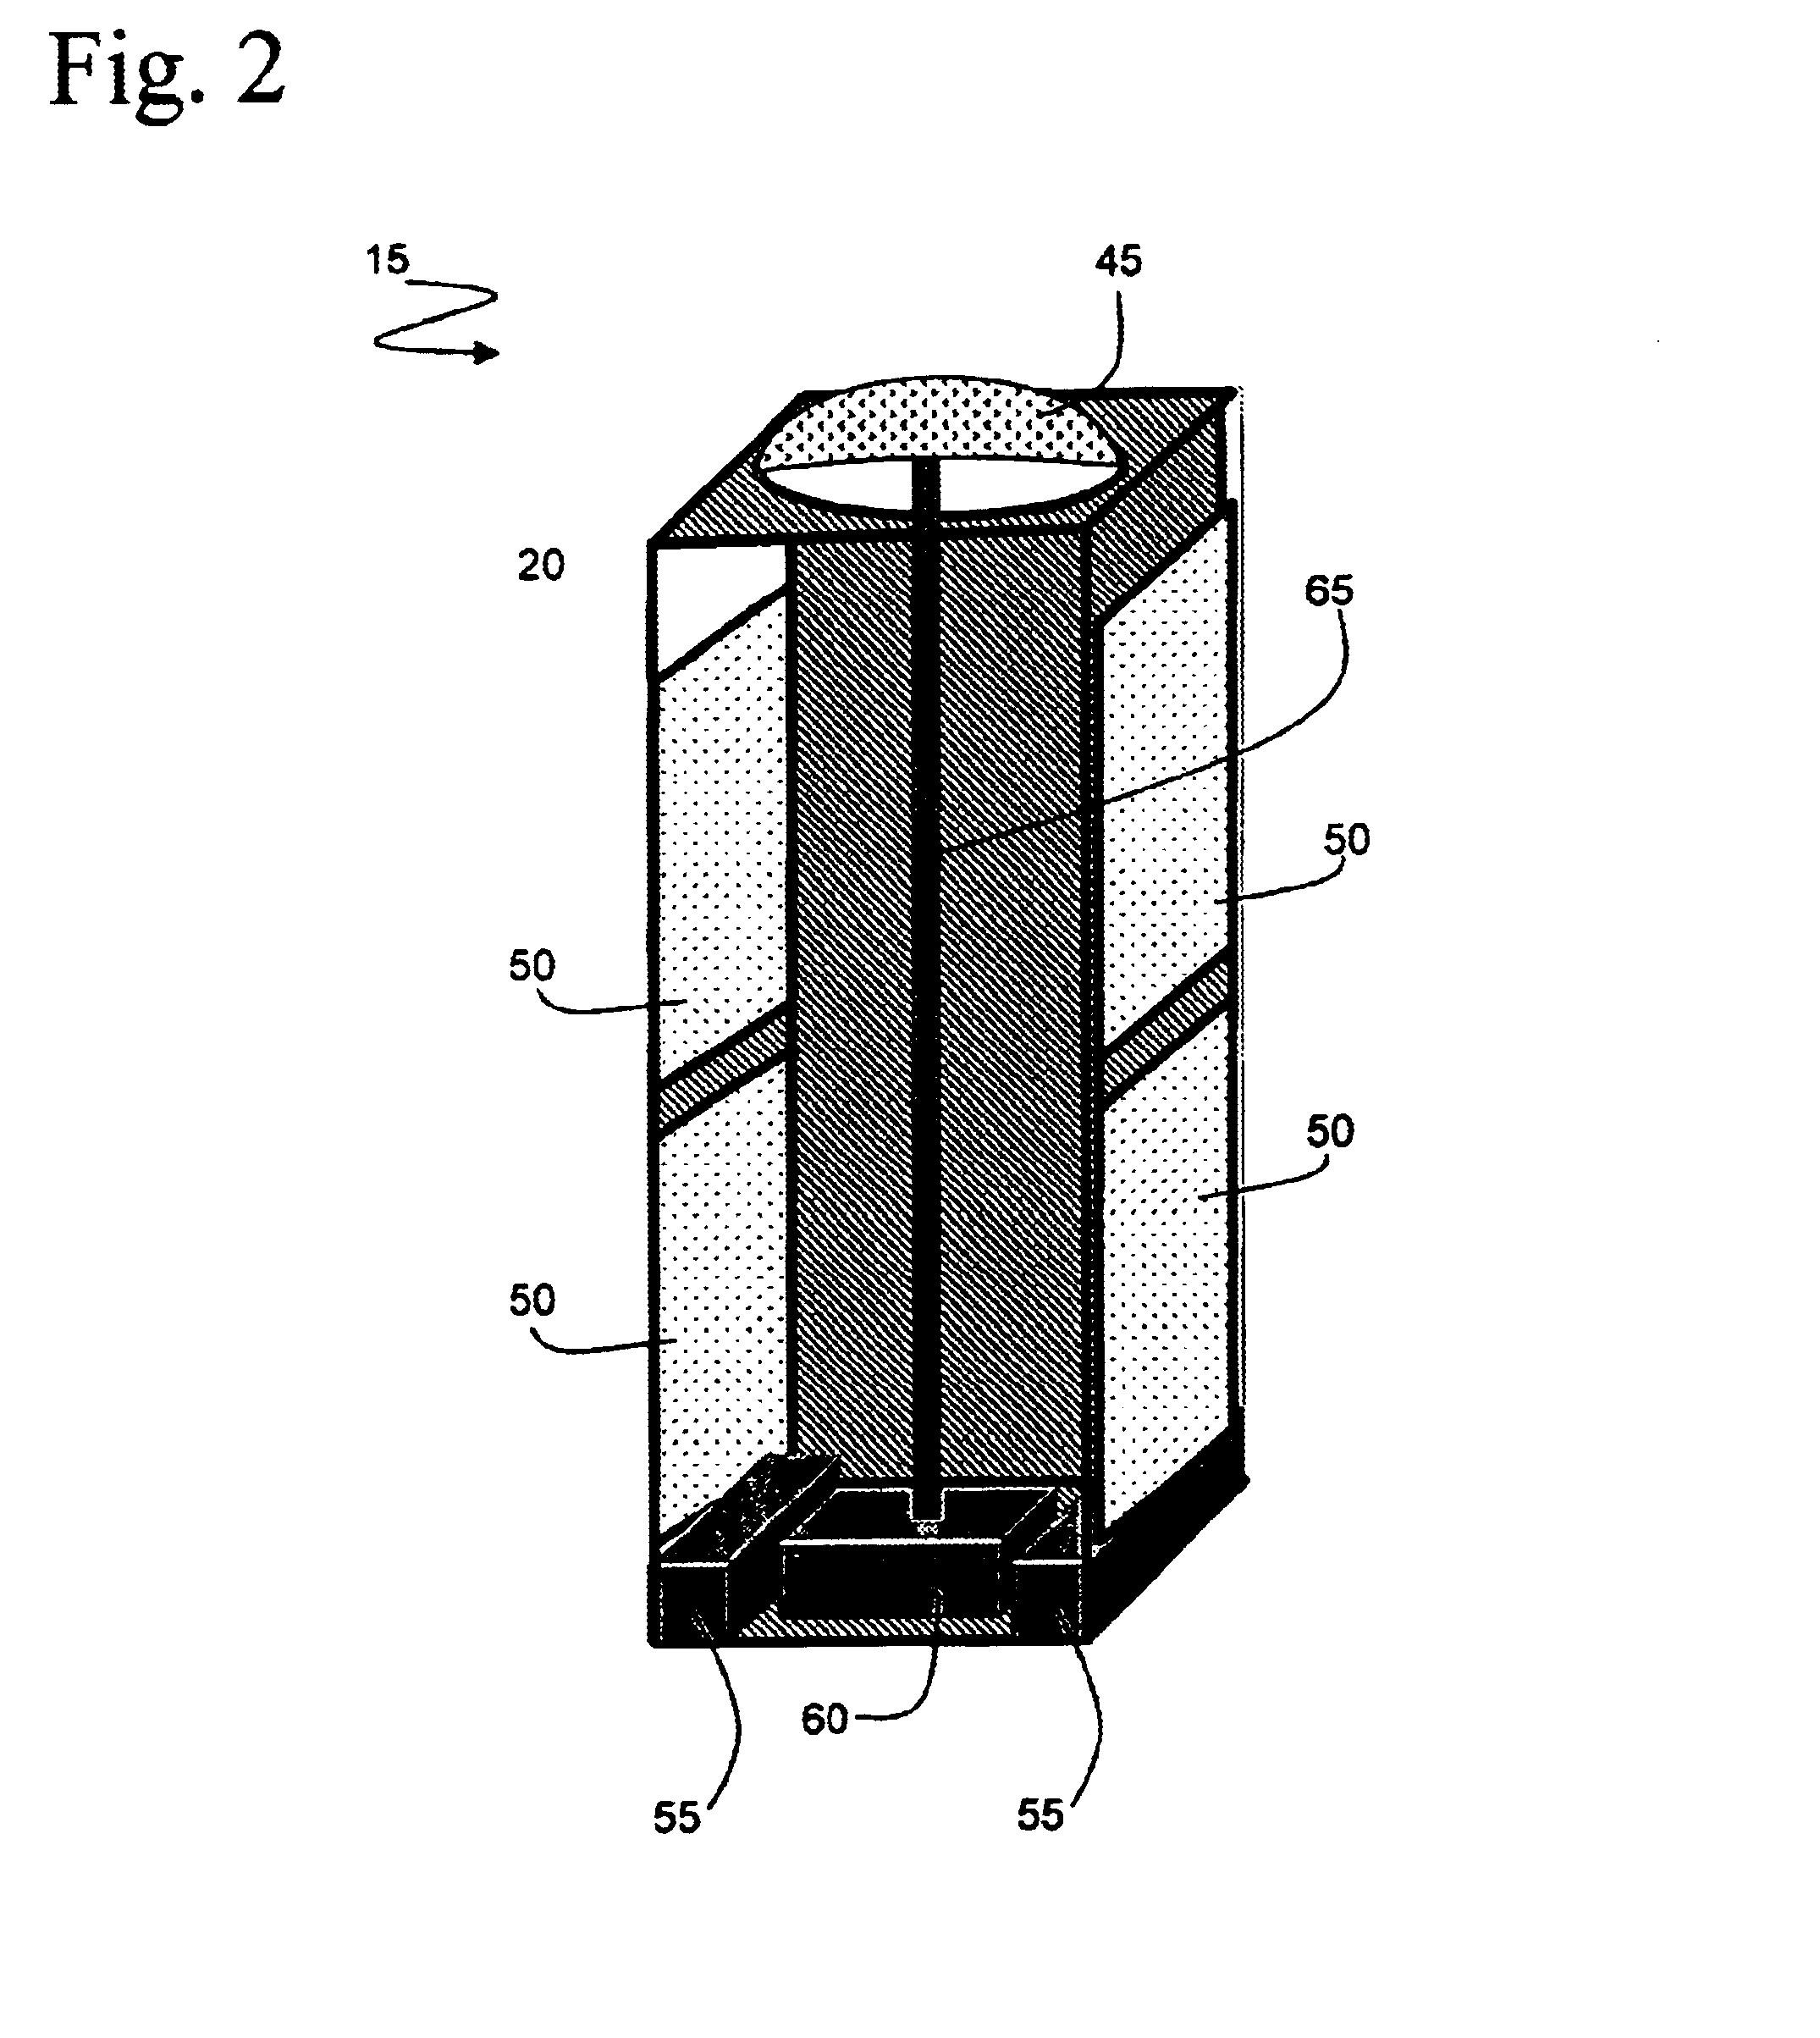 Electroactive polymer actuator braille cell and braille display